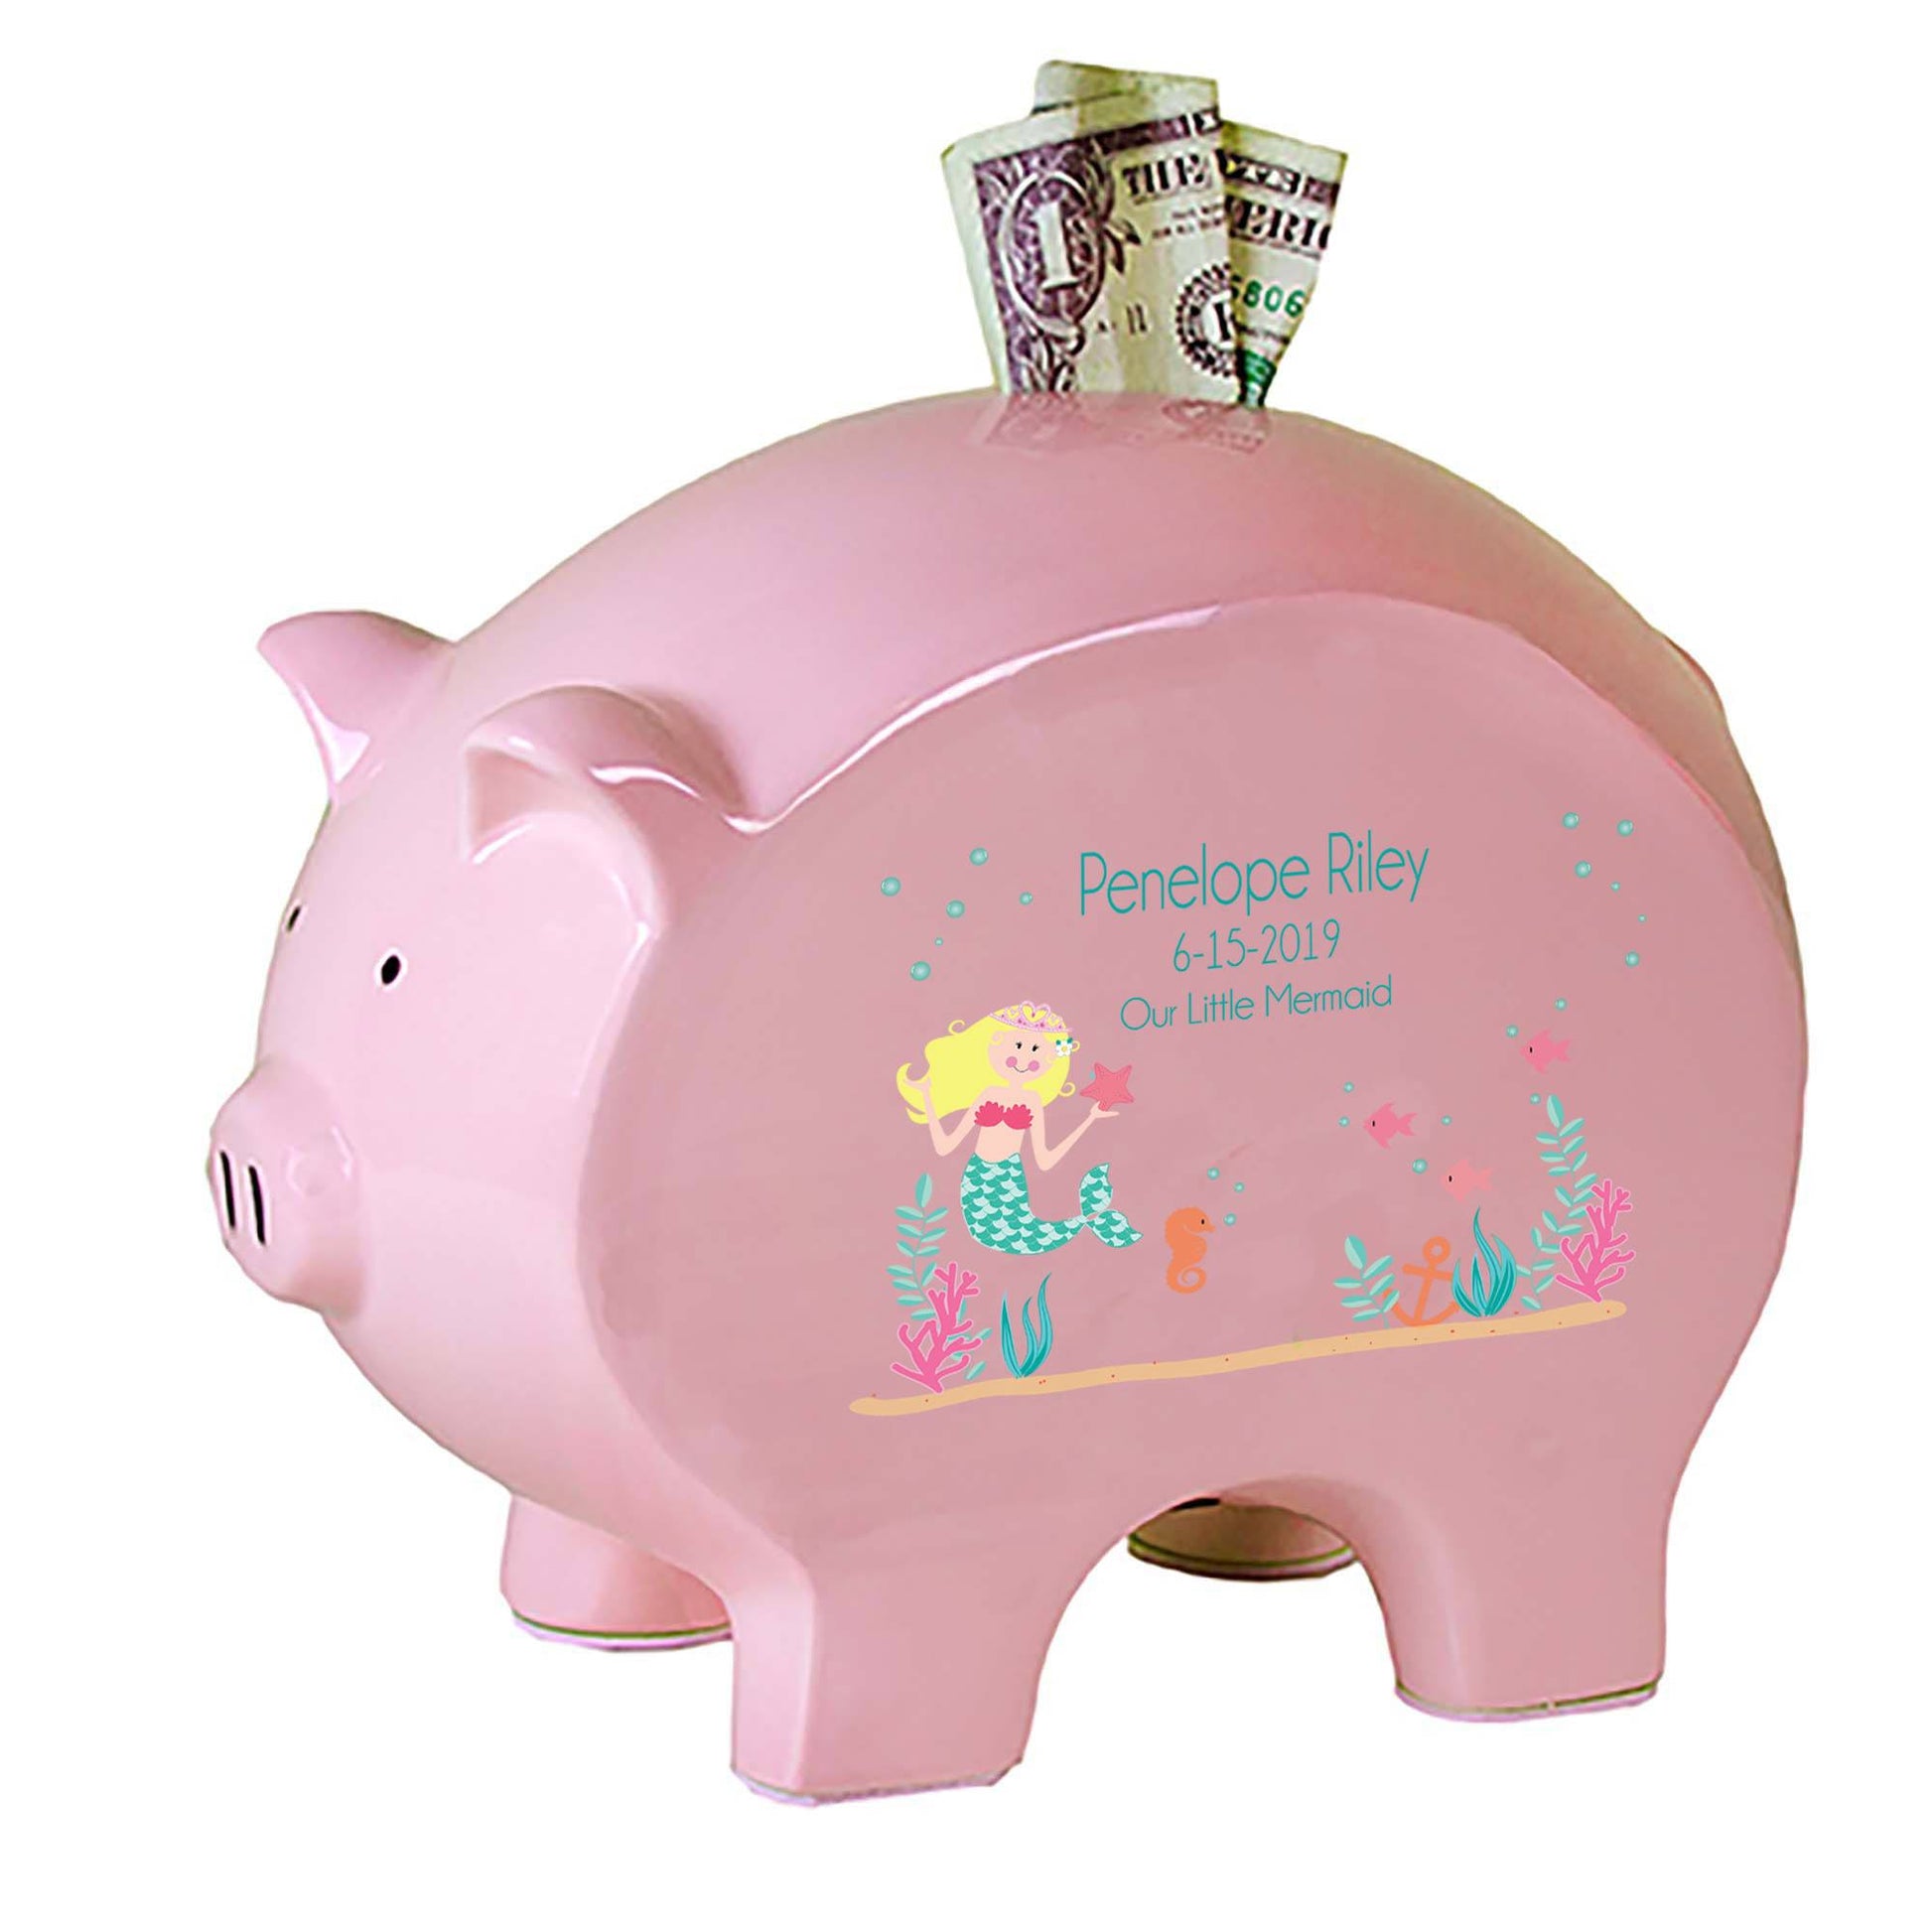 Personalized Pink Piggy Bank with Blonde Mermaid Princess design